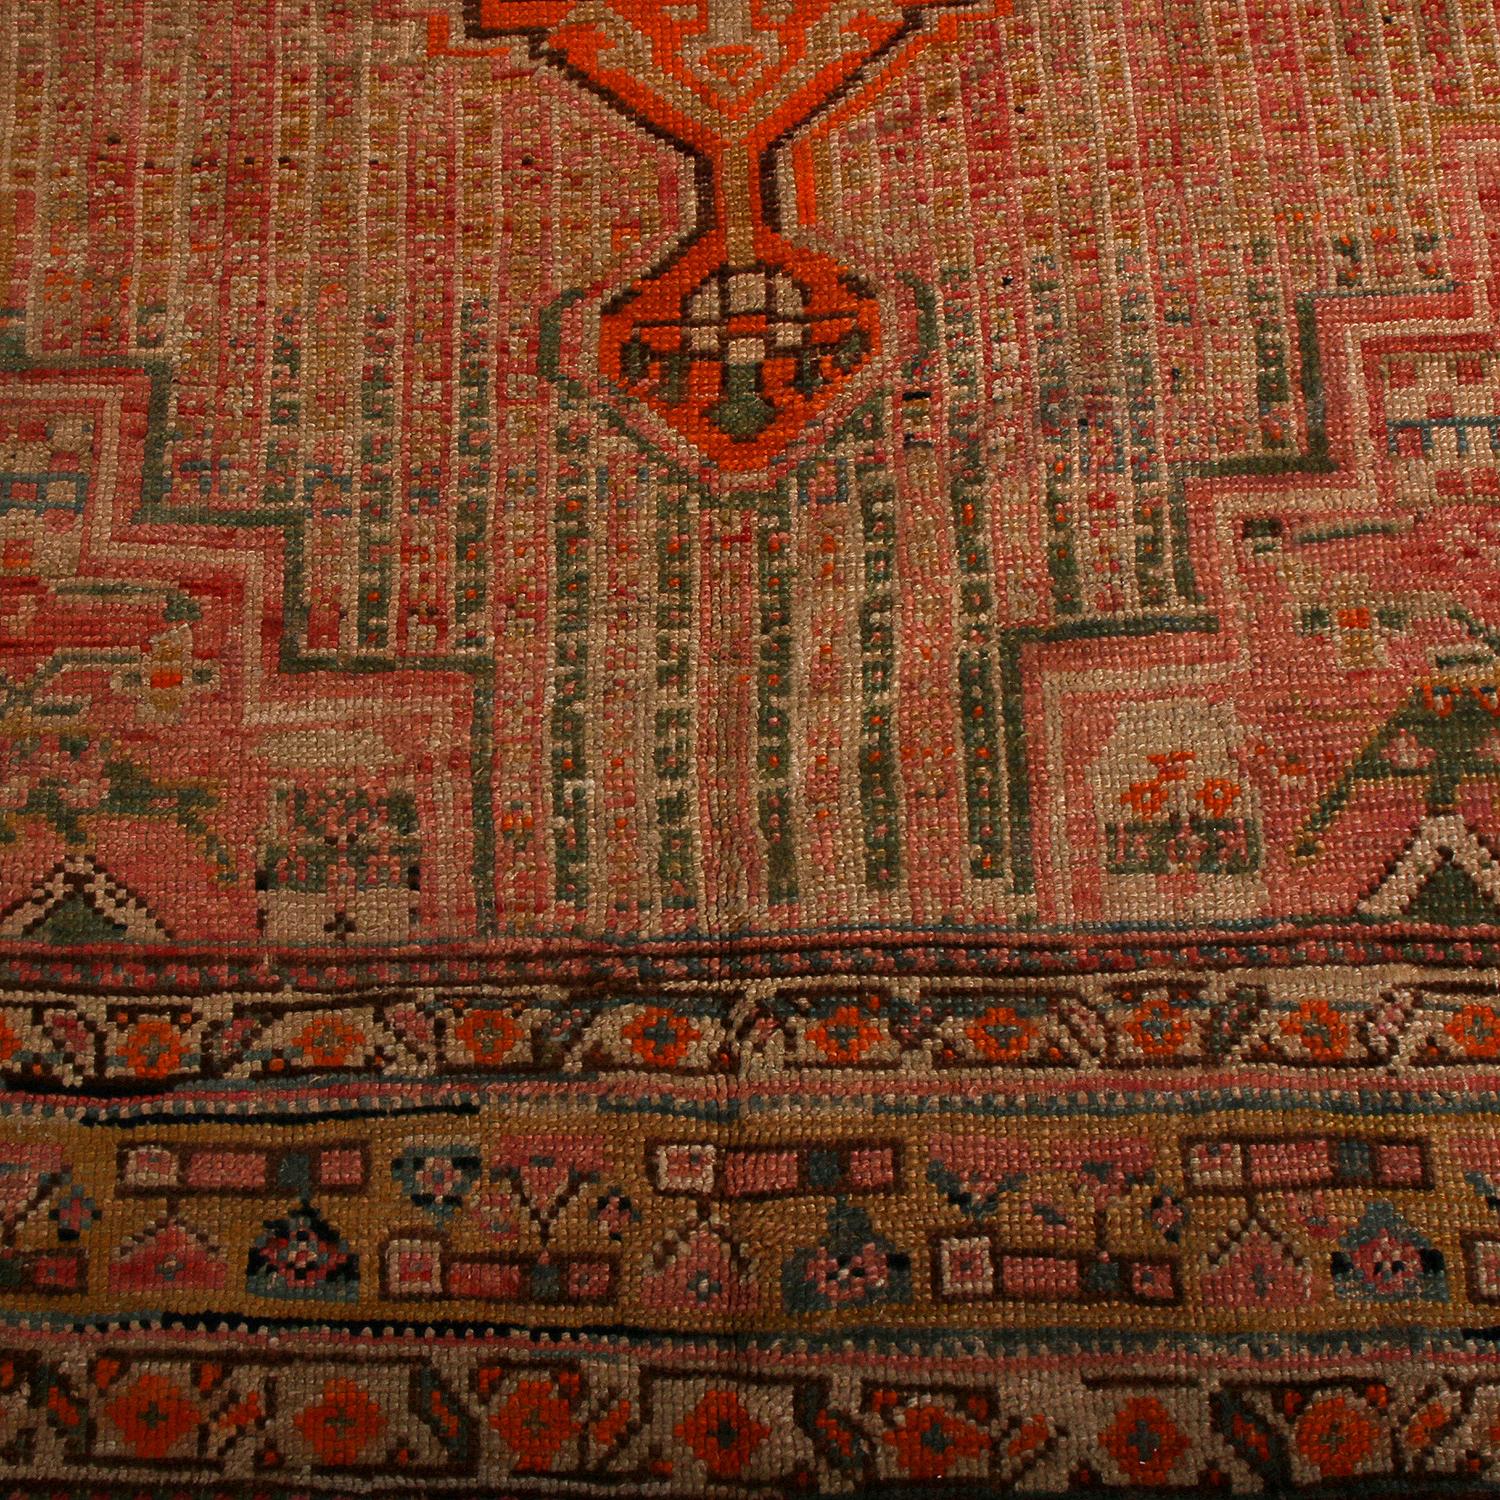 This 7x12 antique Persian is a mid-century tribal carpet believed to be of Qashqai origin. Hand-knotted in wool circa 1910-1920, its design favors medallions and geometric patterns in red, beige-brown and gold. 

On the Design:  

Connoisseurs will